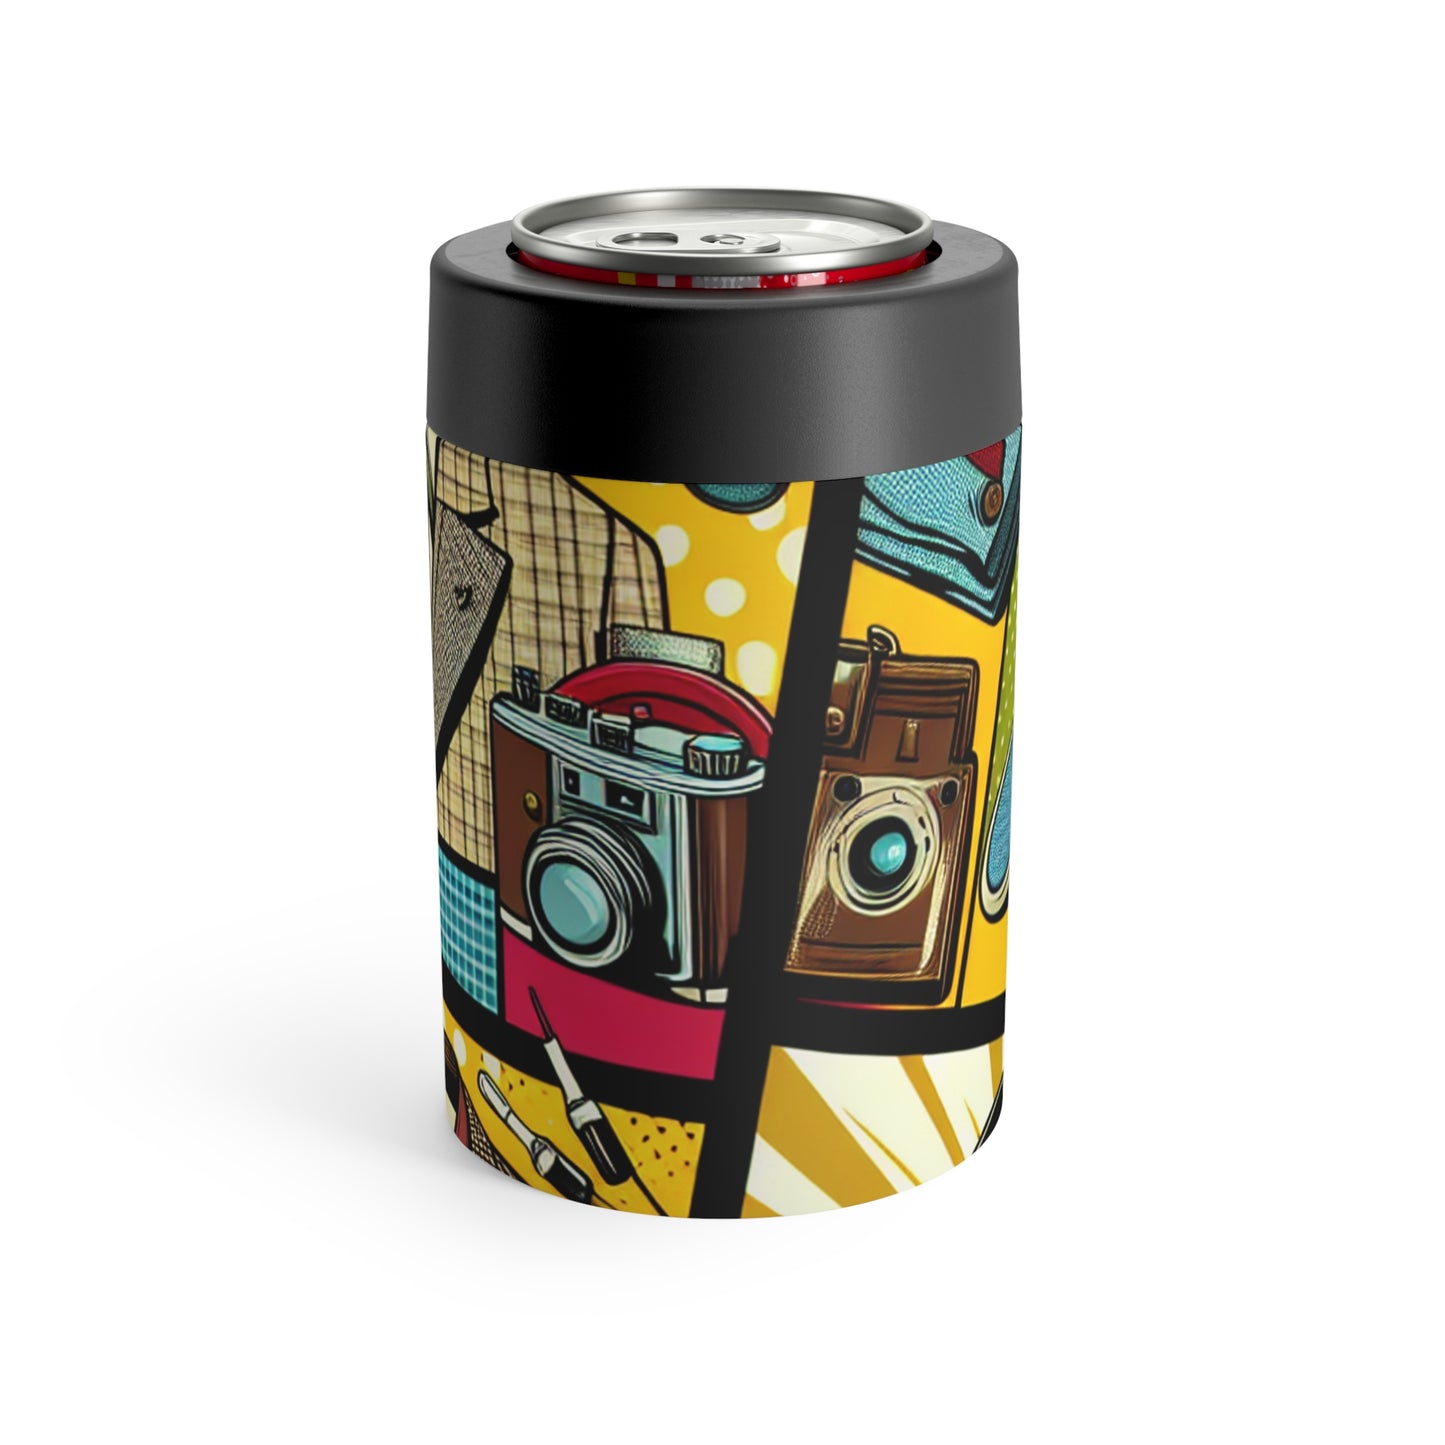 "Pop Art Apparel: A Collage of Vintage Style" - The Alien Can Holder pop art Style